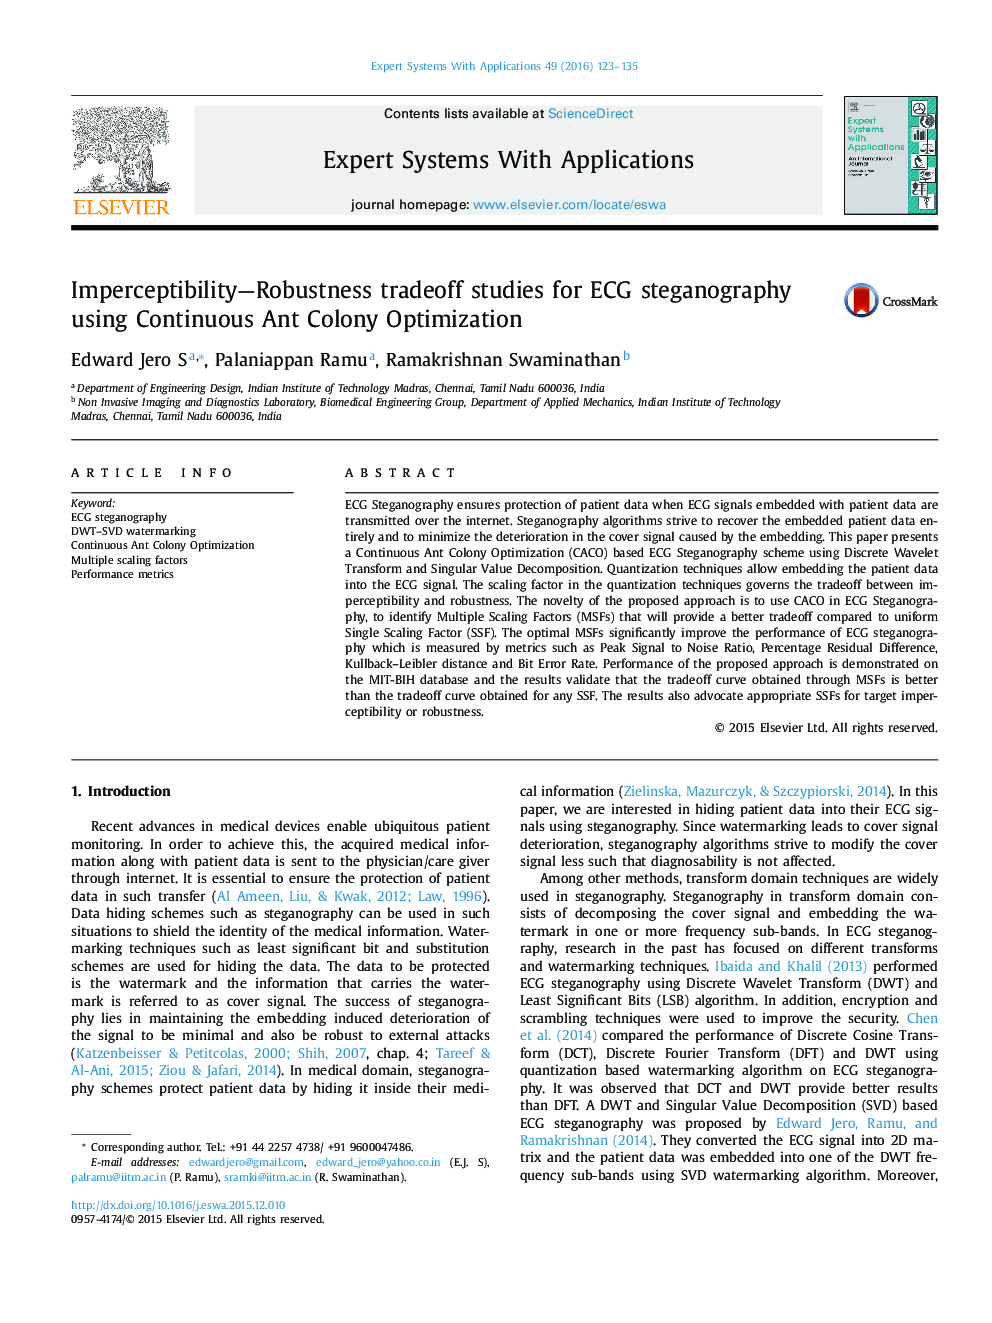 Imperceptibility—Robustness tradeoff studies for ECG steganography using Continuous Ant Colony Optimization